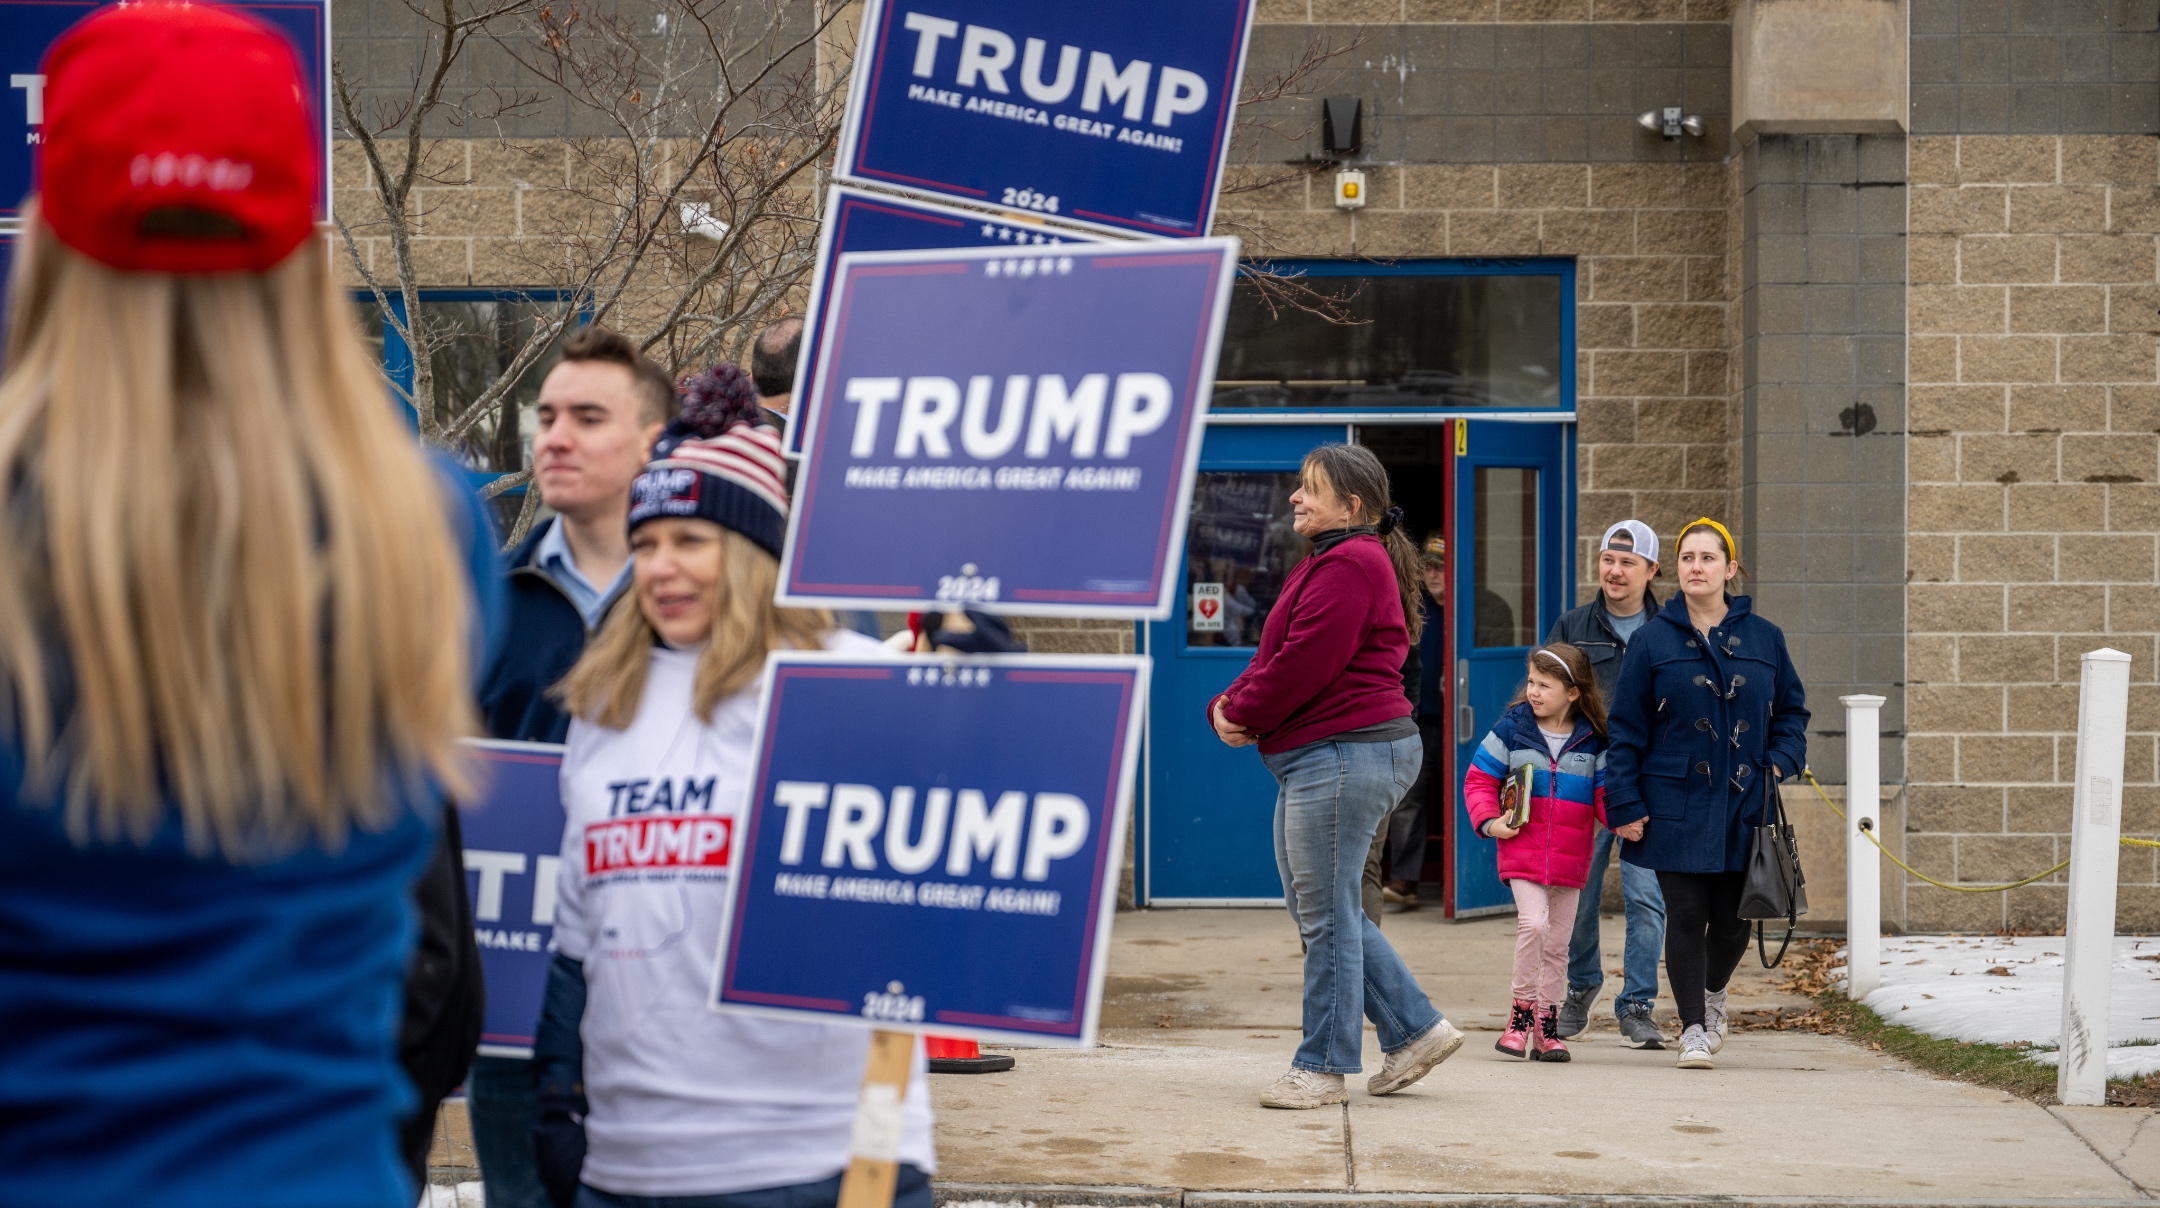 People exit a polling center at Londonderry High School as Trump supporters rally outside, in Londonderry, New Hampshire, Jan. 23, 2024. (Brandon Bell/Getty Images)